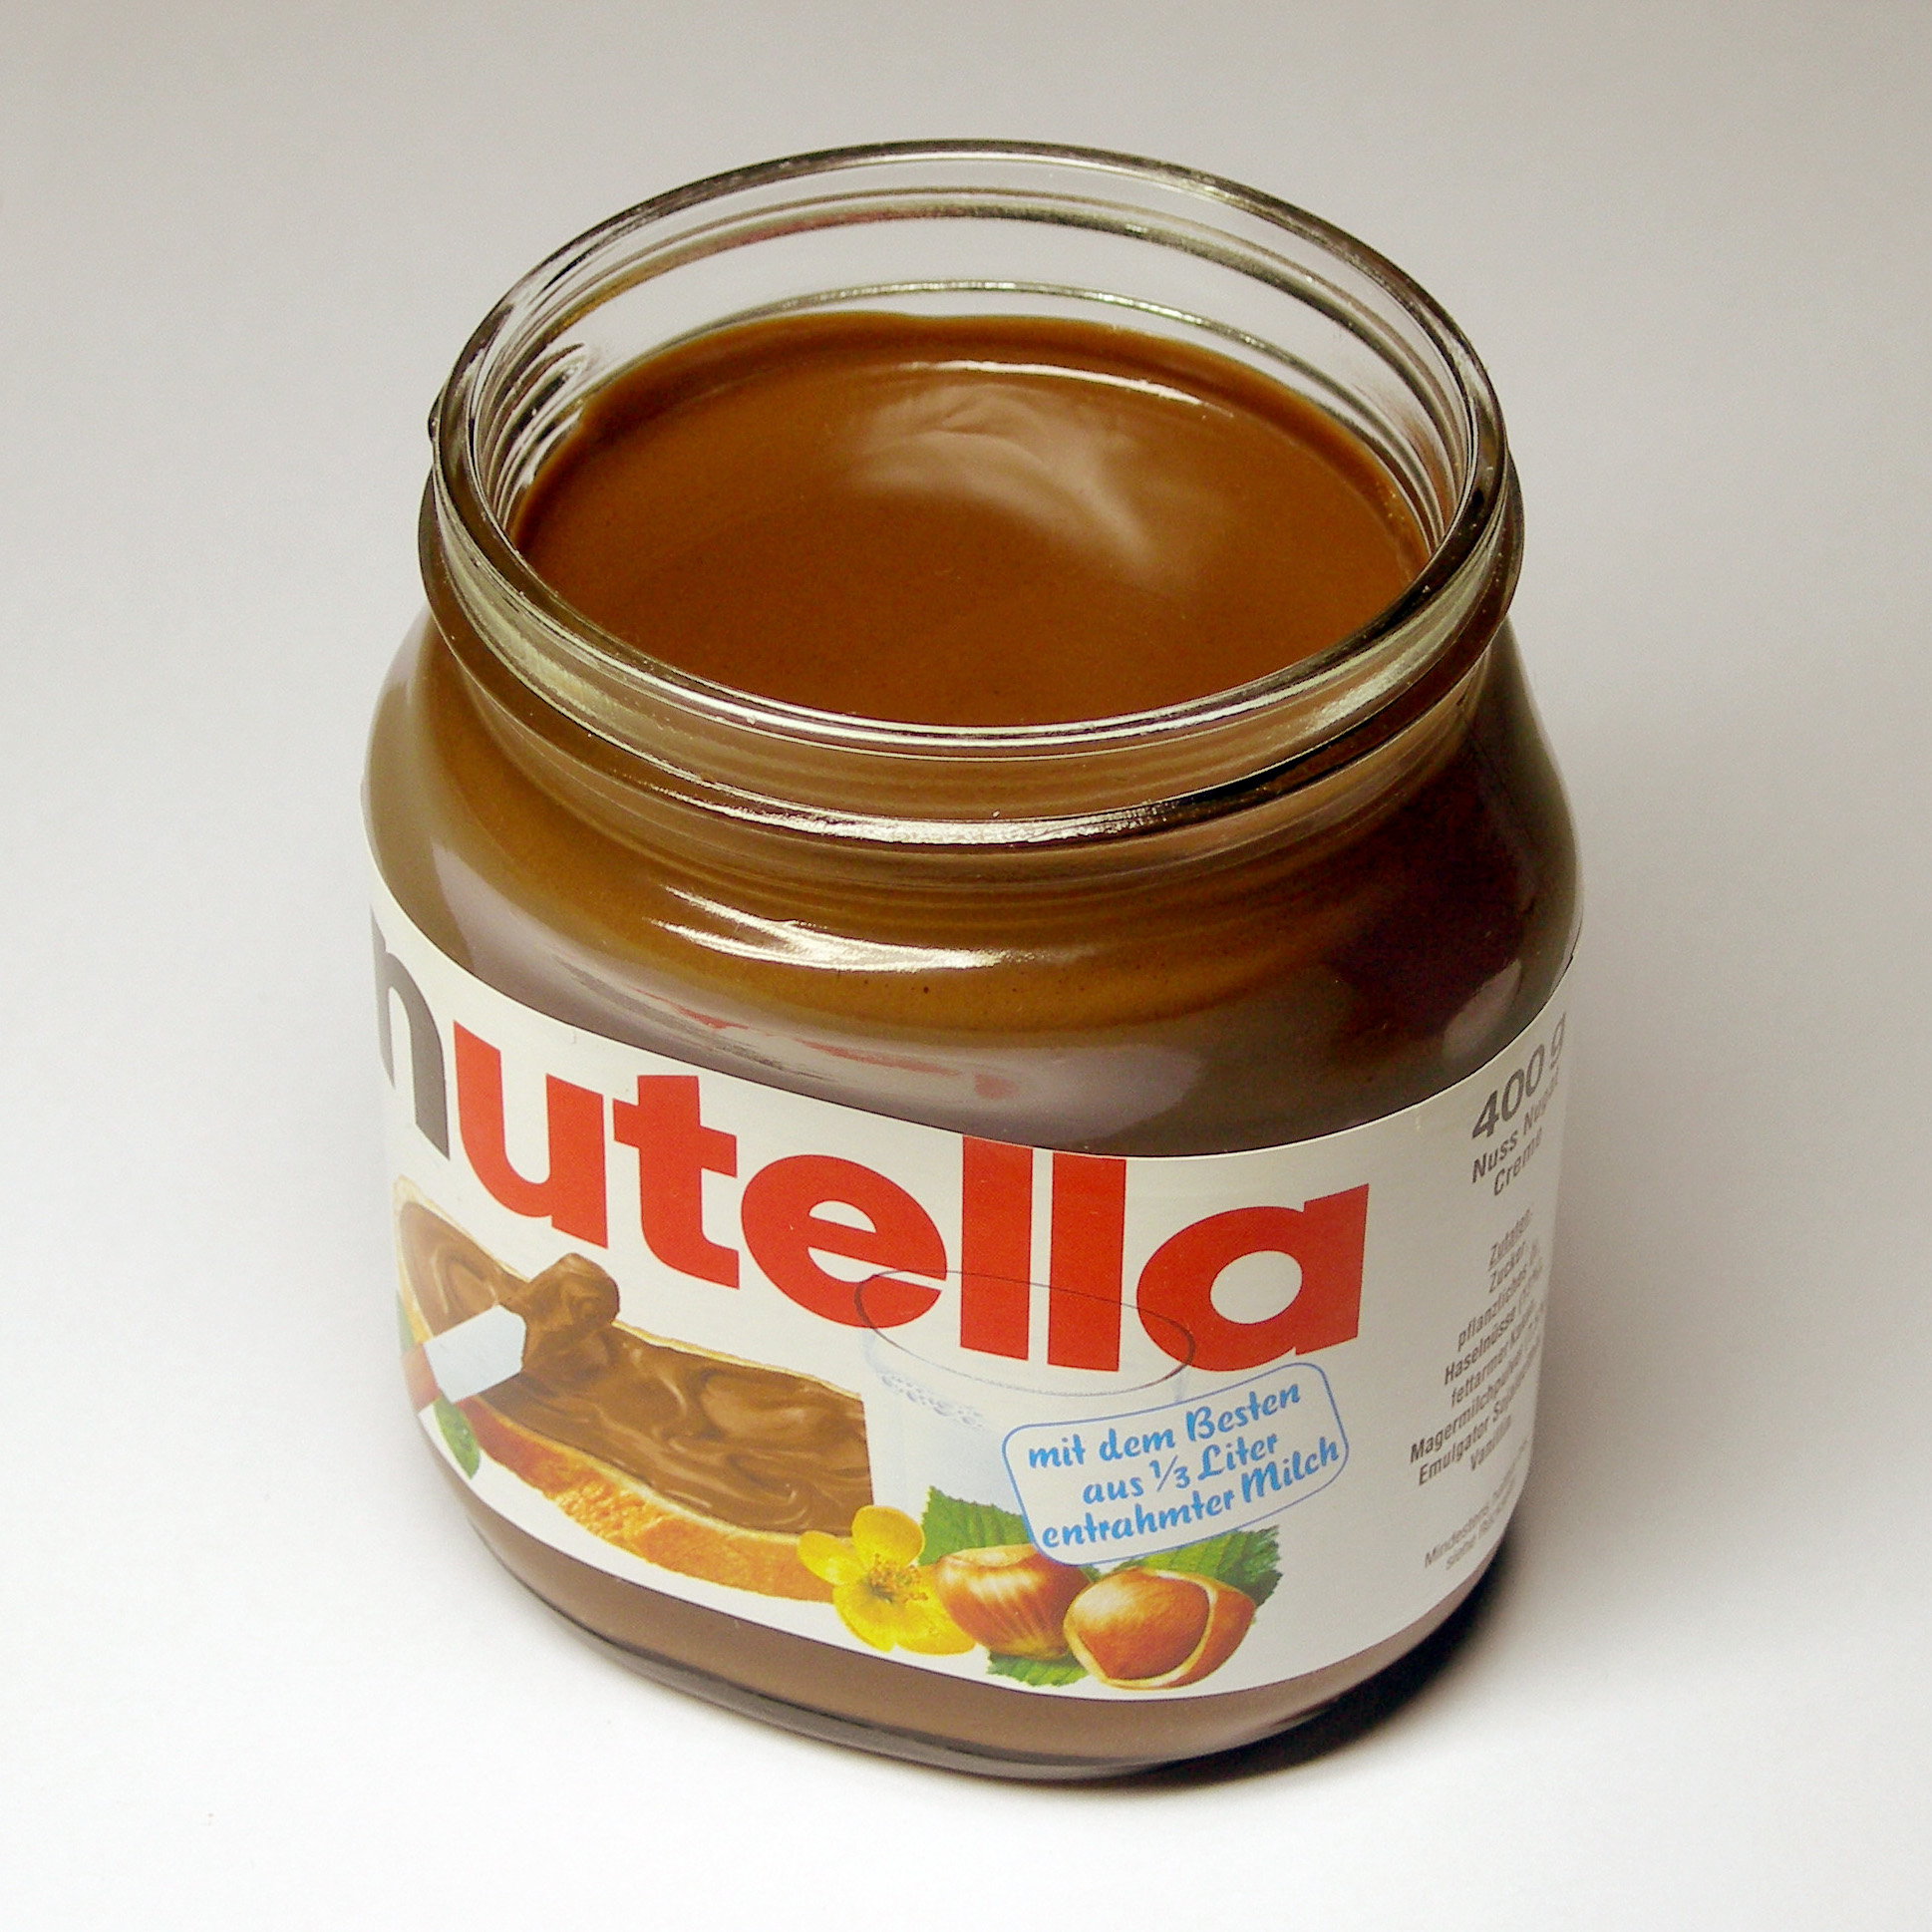 Out With The Wine, In With The Nutella